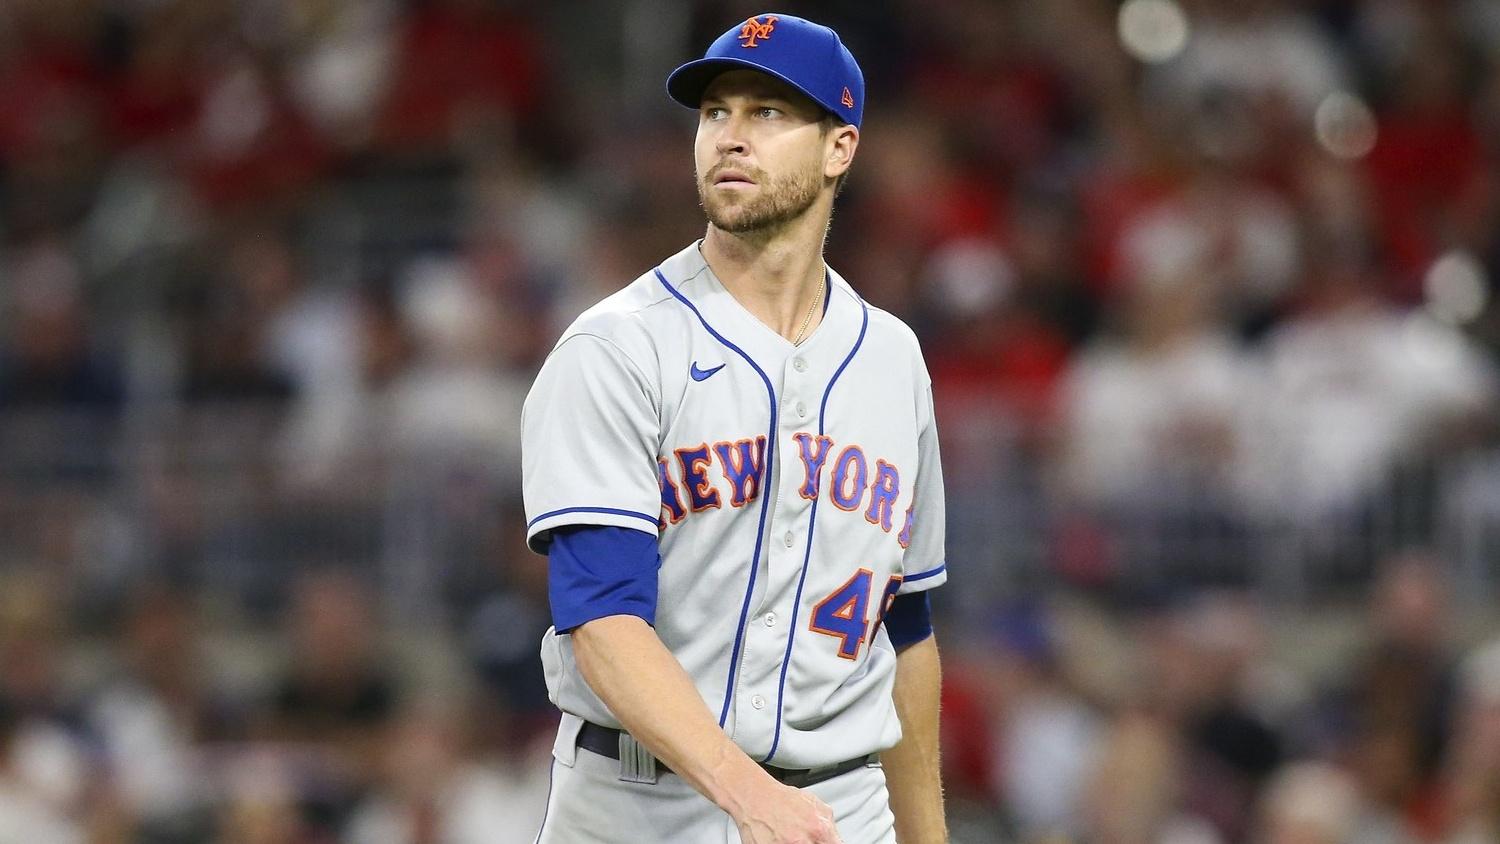 Sep 30, 2022; Atlanta, Georgia, USA; New York Mets starting pitcher Jacob deGrom (48) walks off the mound against the Atlanta Braves in the second inning at Truist Park. / Brett Davis-USA TODAY Sports